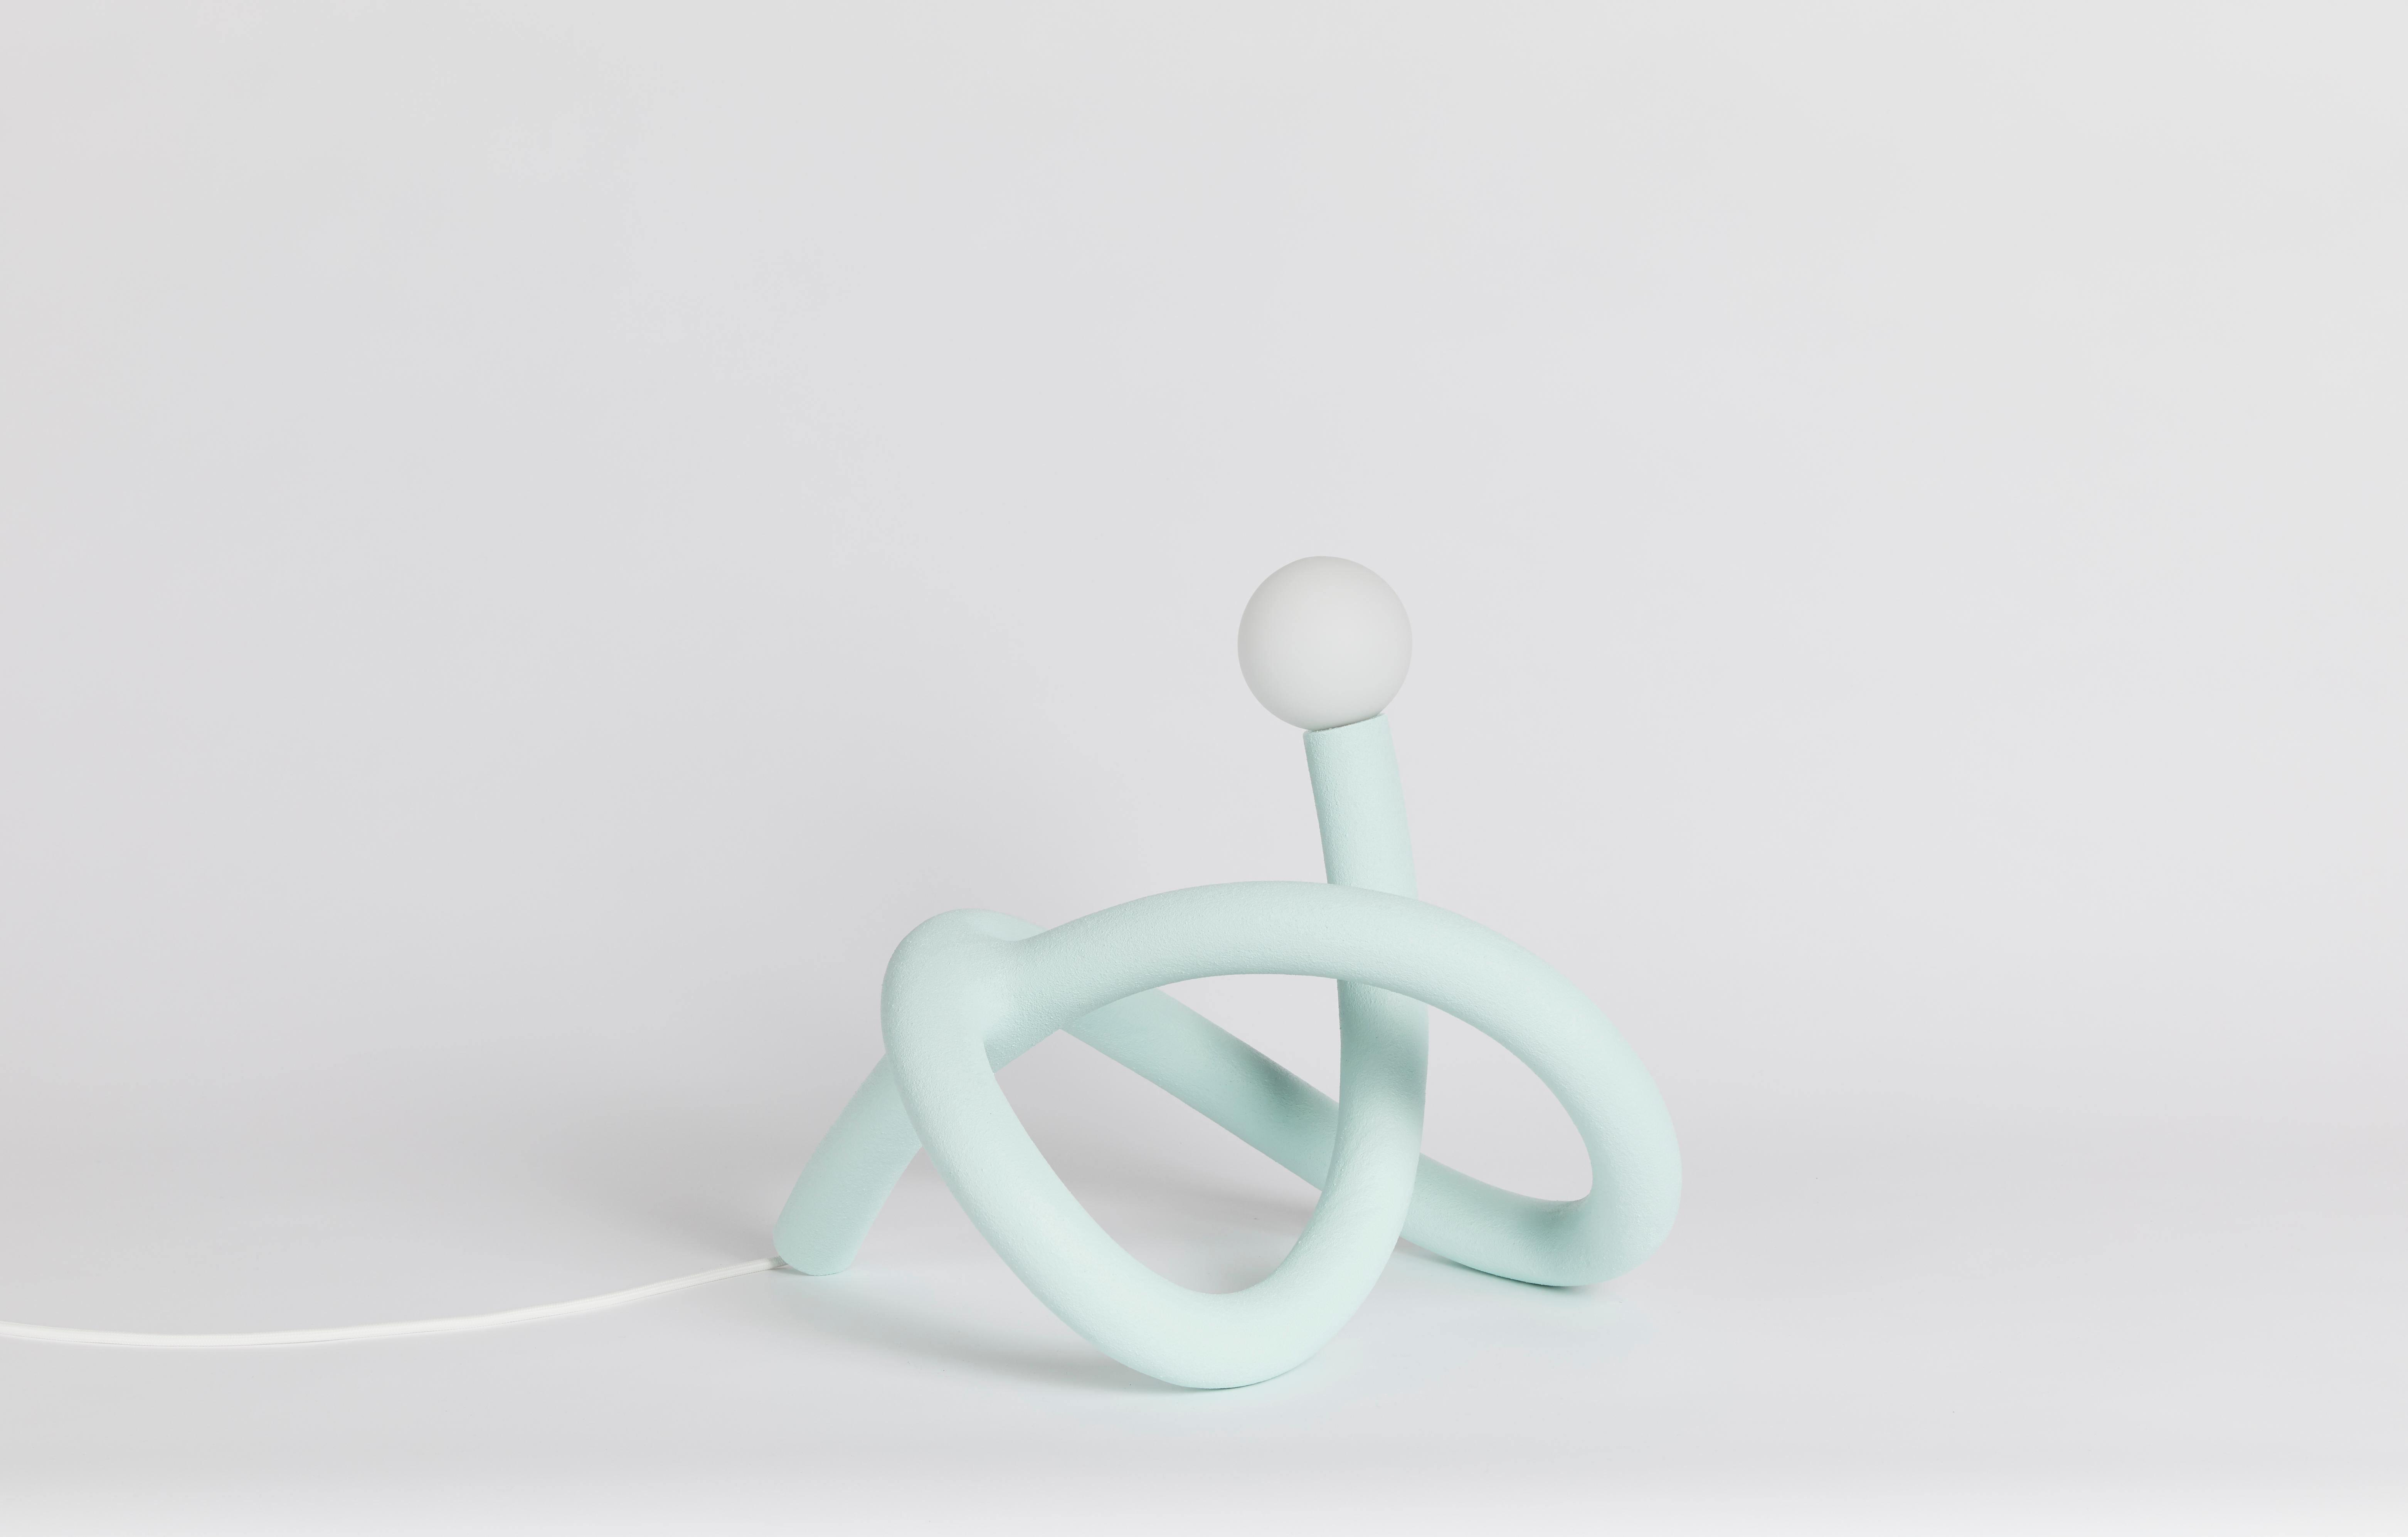 Random desk light by Hot Wire Extensions
Limited Edition
Materials: Waste SLS 3D nylon powder, sand from sustainable sources
Dimensions: W 33 x L 47 x H 34 cm 
Colour: aqua
Also available in: lemon, cream, anthracite, grey, pink

All our lamps can